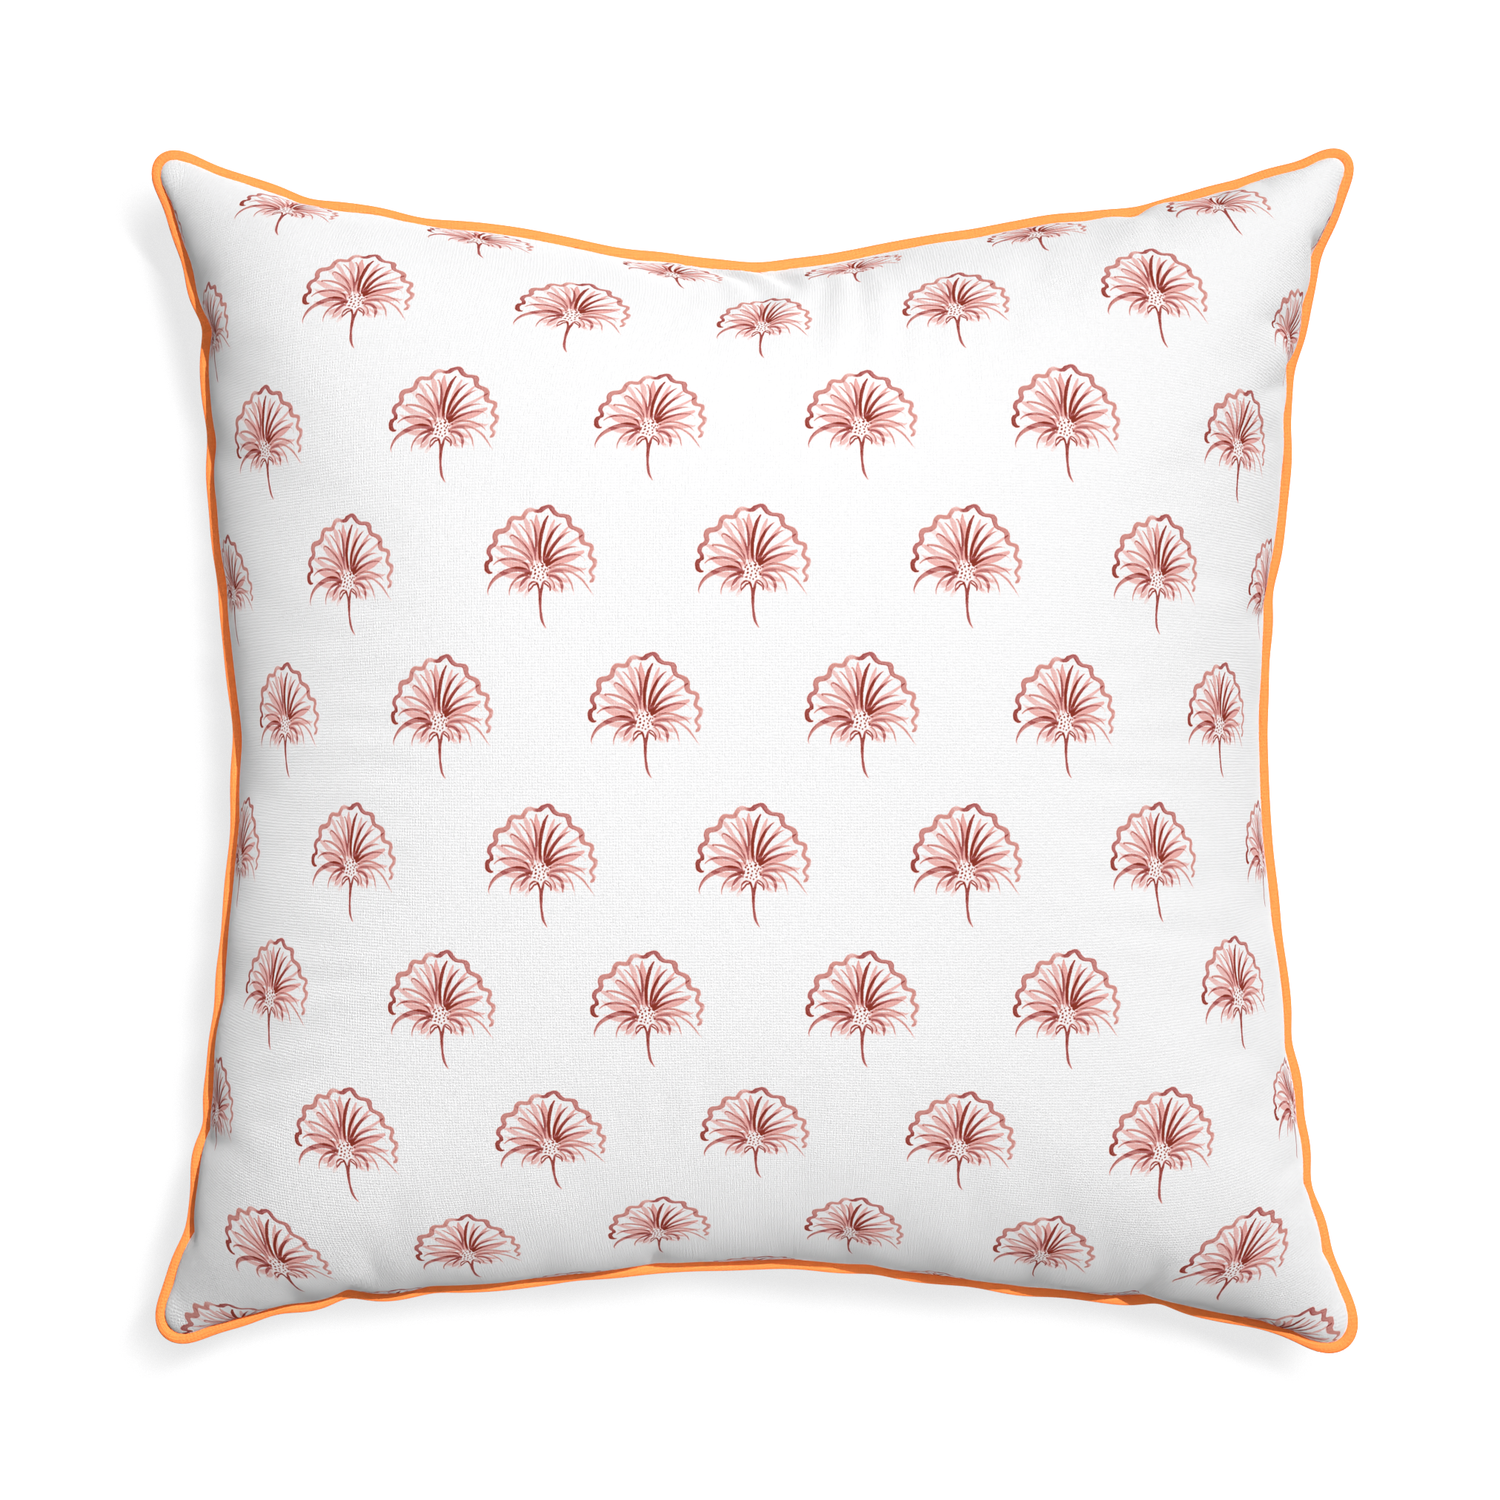 Euro-sham penelope rose custom pillow with clementine piping on white background